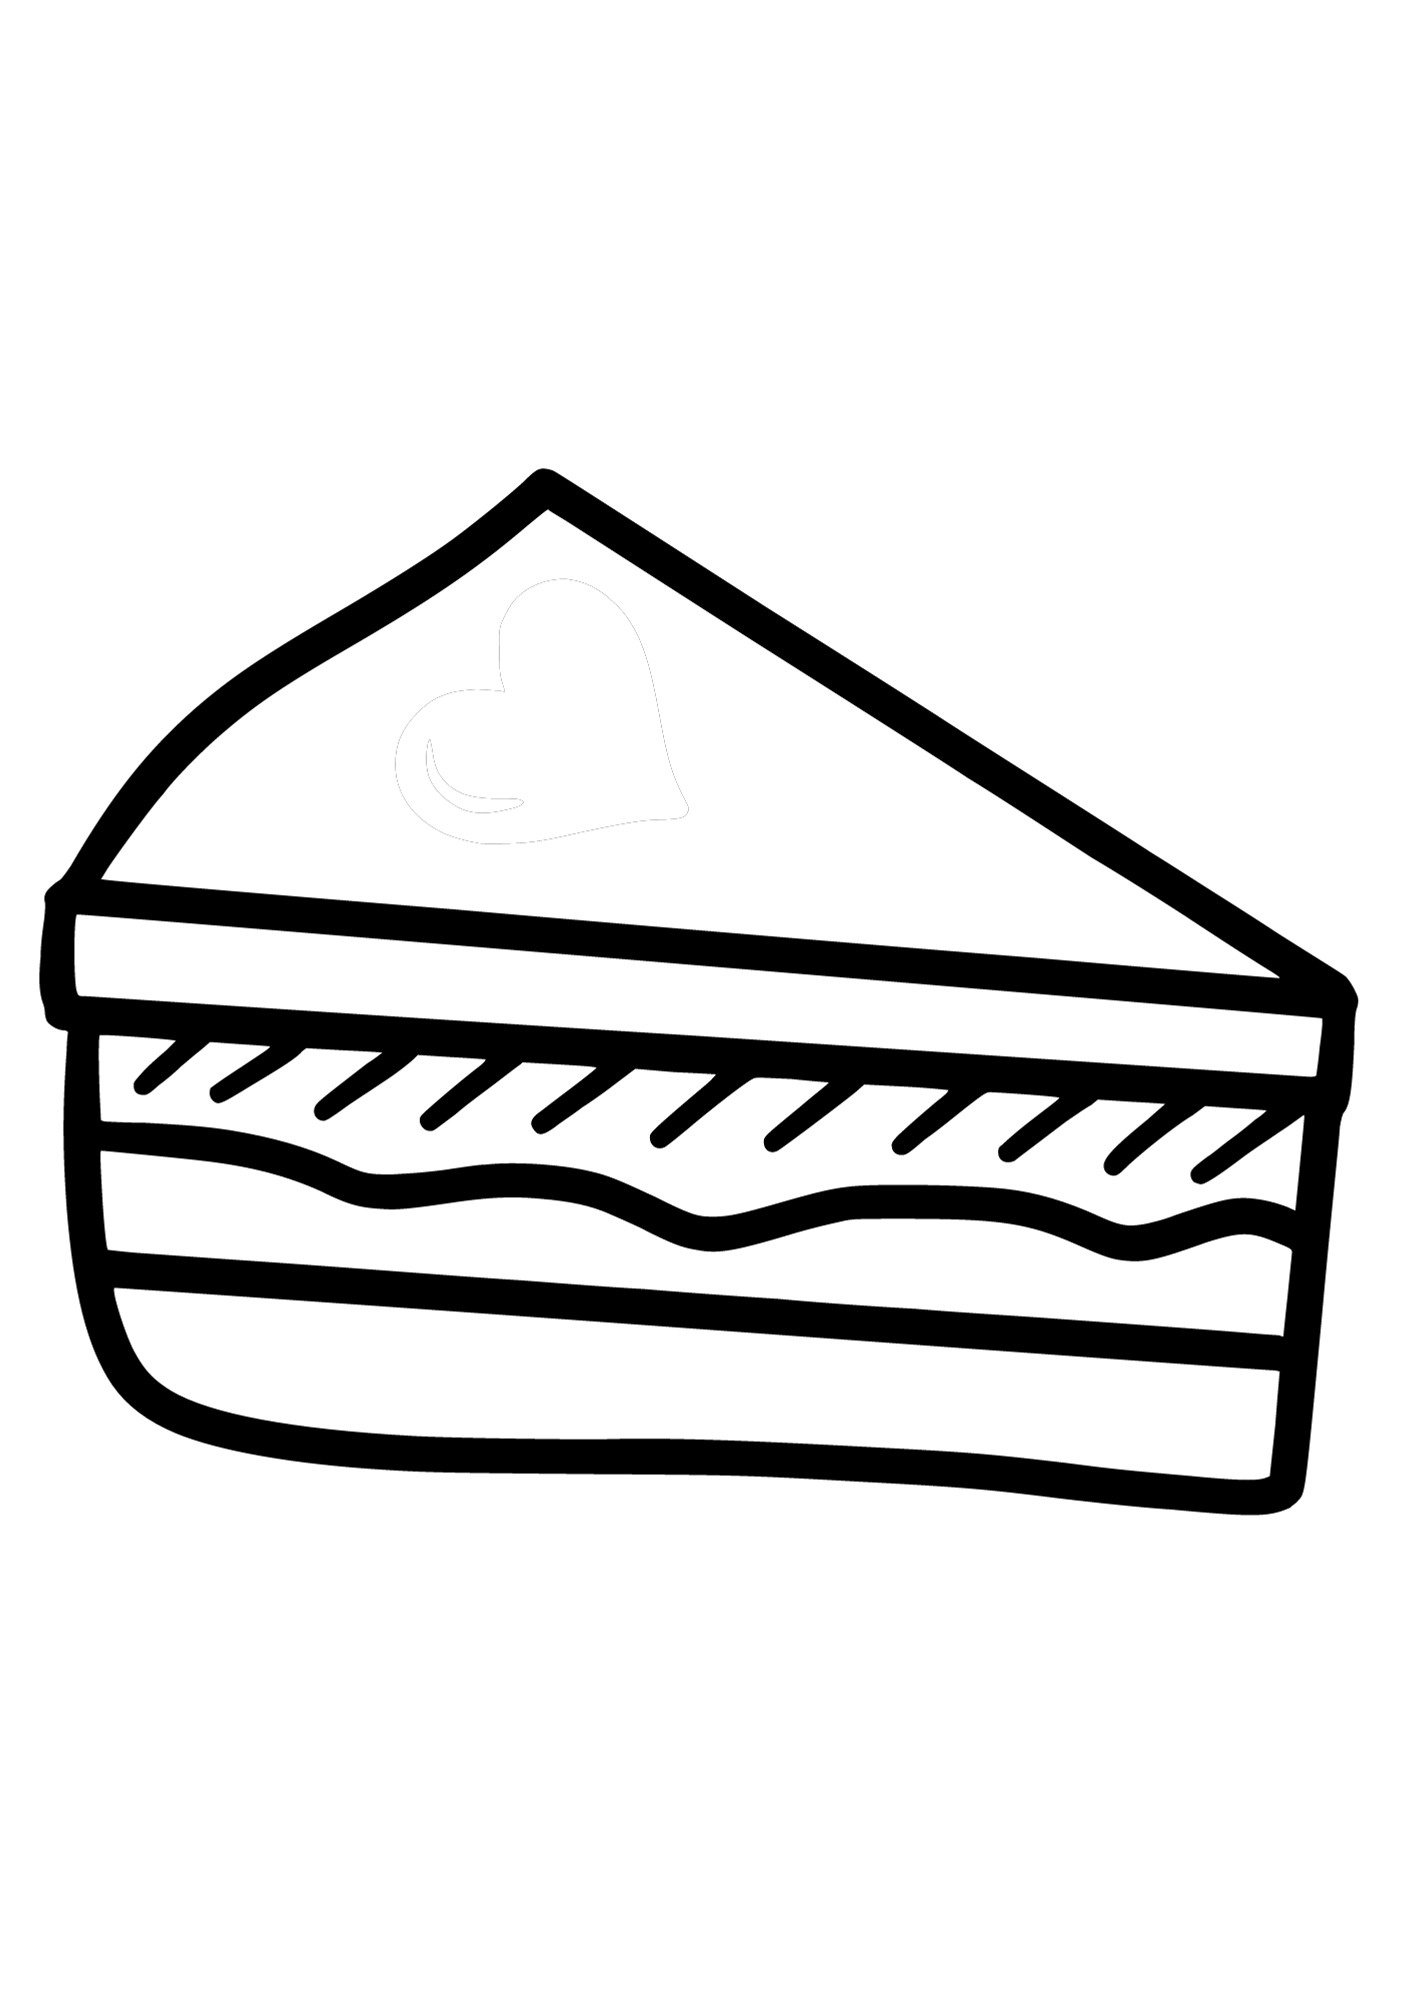 Cute Cake Coloring Page